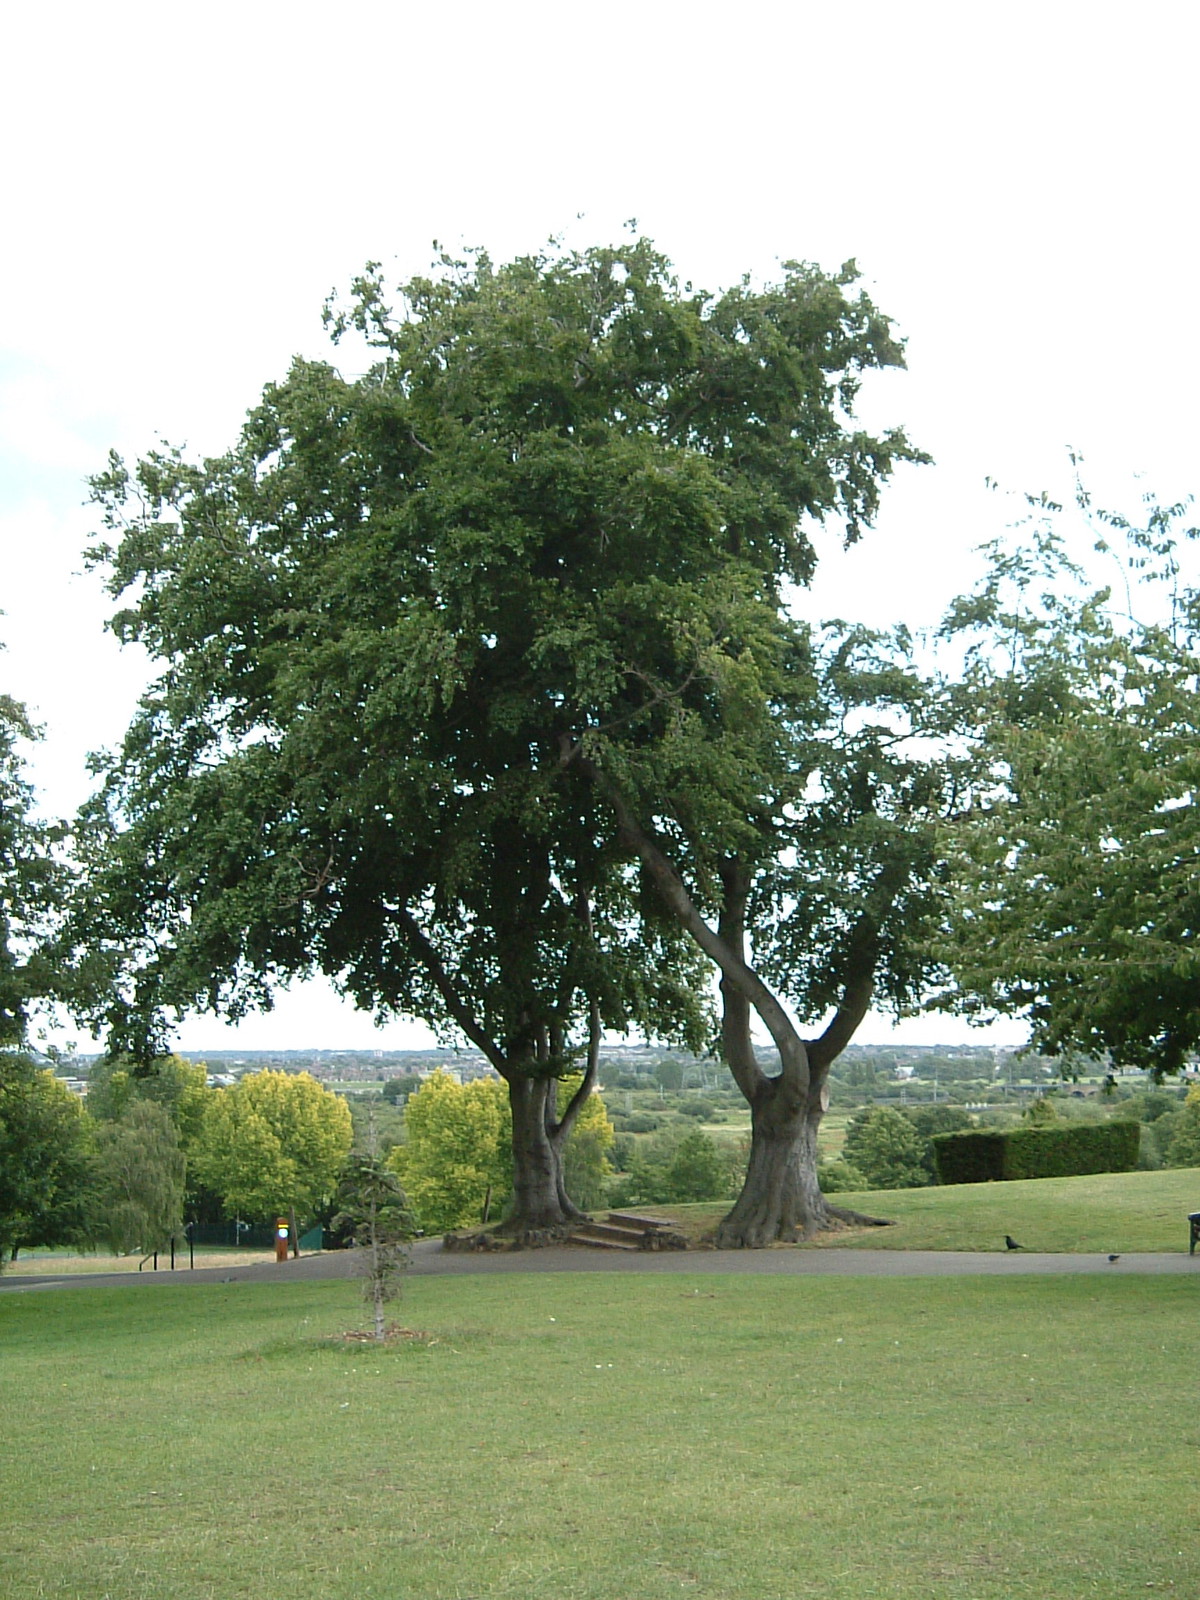 The 'two giants of Springfield Park'